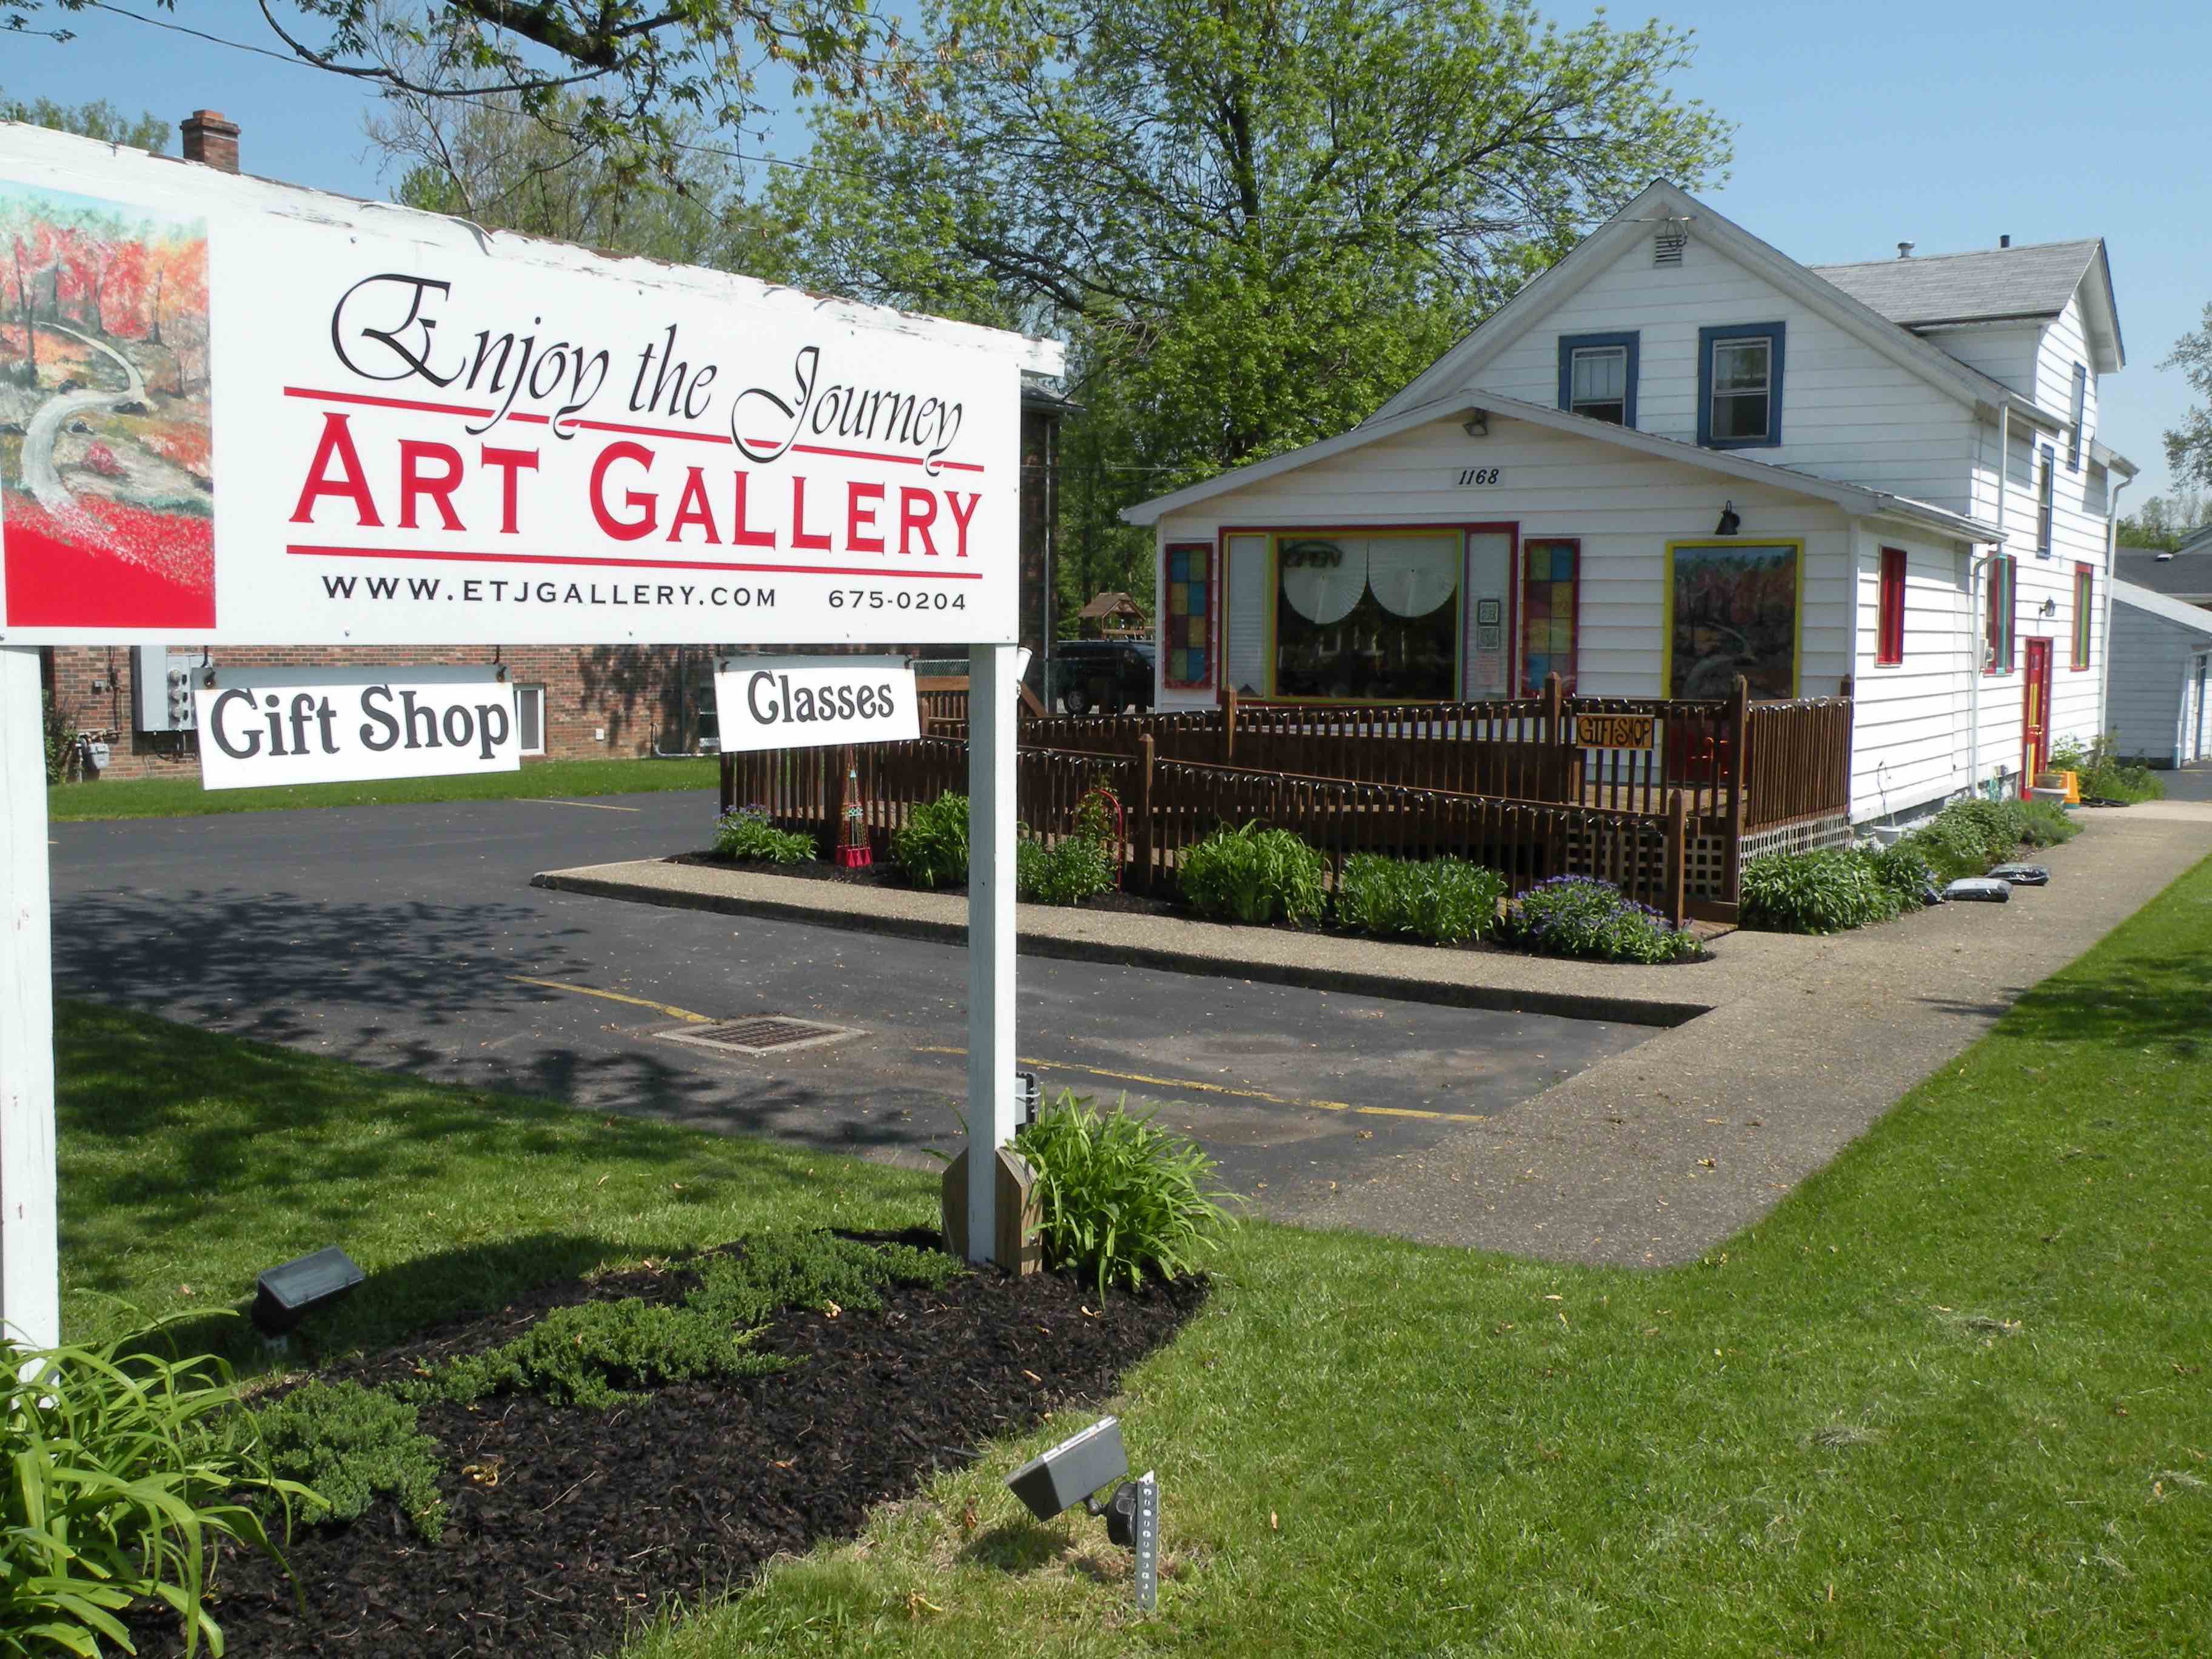 Exhibits, classes fill the calendar at Enjoy the Journey Art Gallery